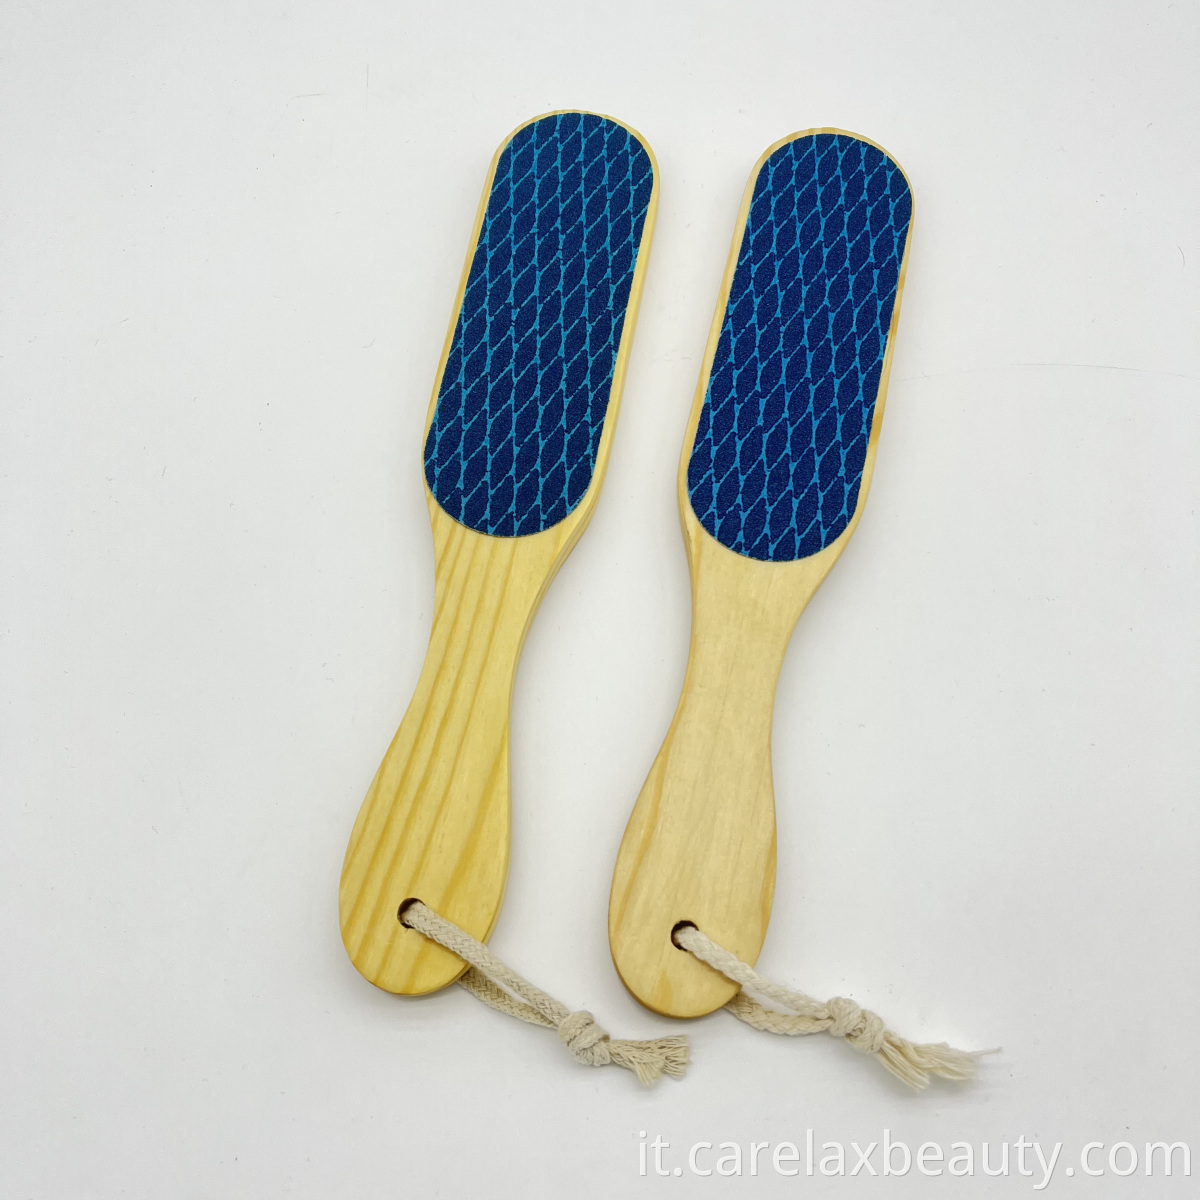 New Improved Pedicure Wooden Foot File Callus Remover5